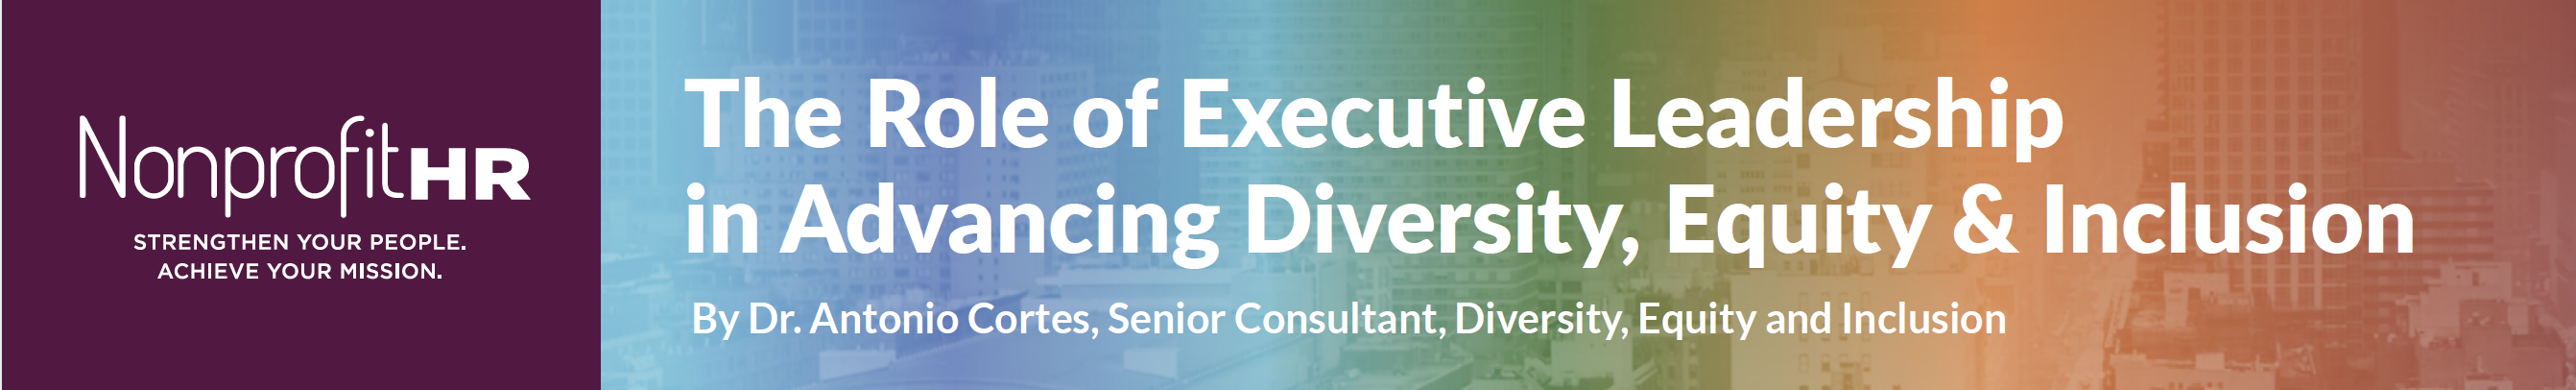 The Role Of Executive Leadership In Advancing Diversity, Equity And Inclusion - Nonprofit HR